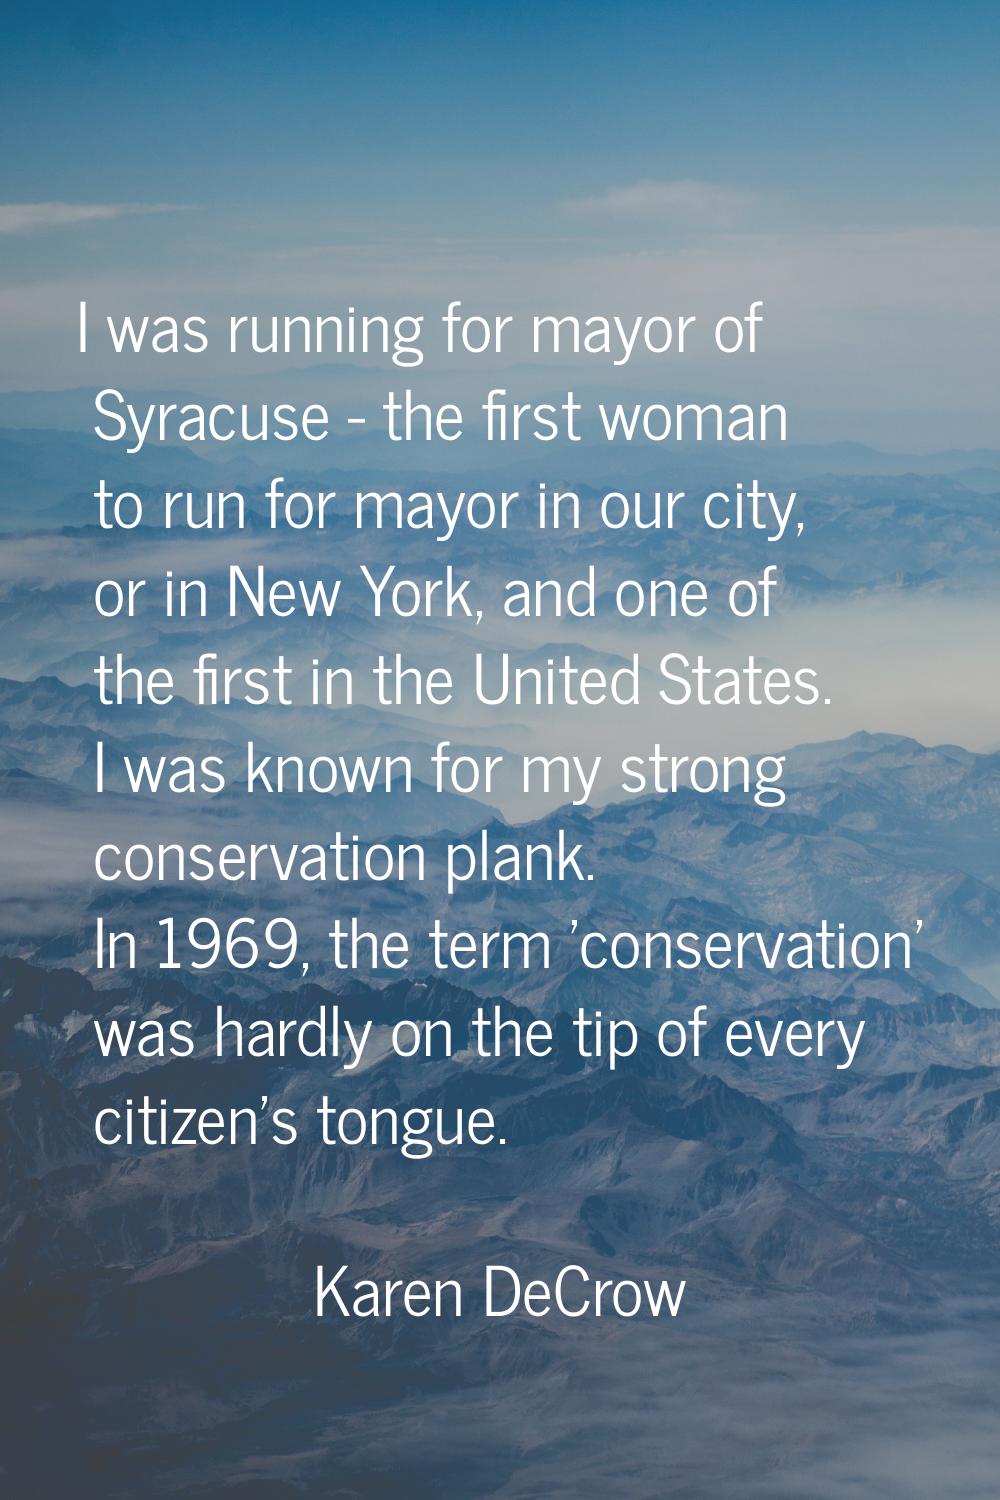 I was running for mayor of Syracuse - the first woman to run for mayor in our city, or in New York,